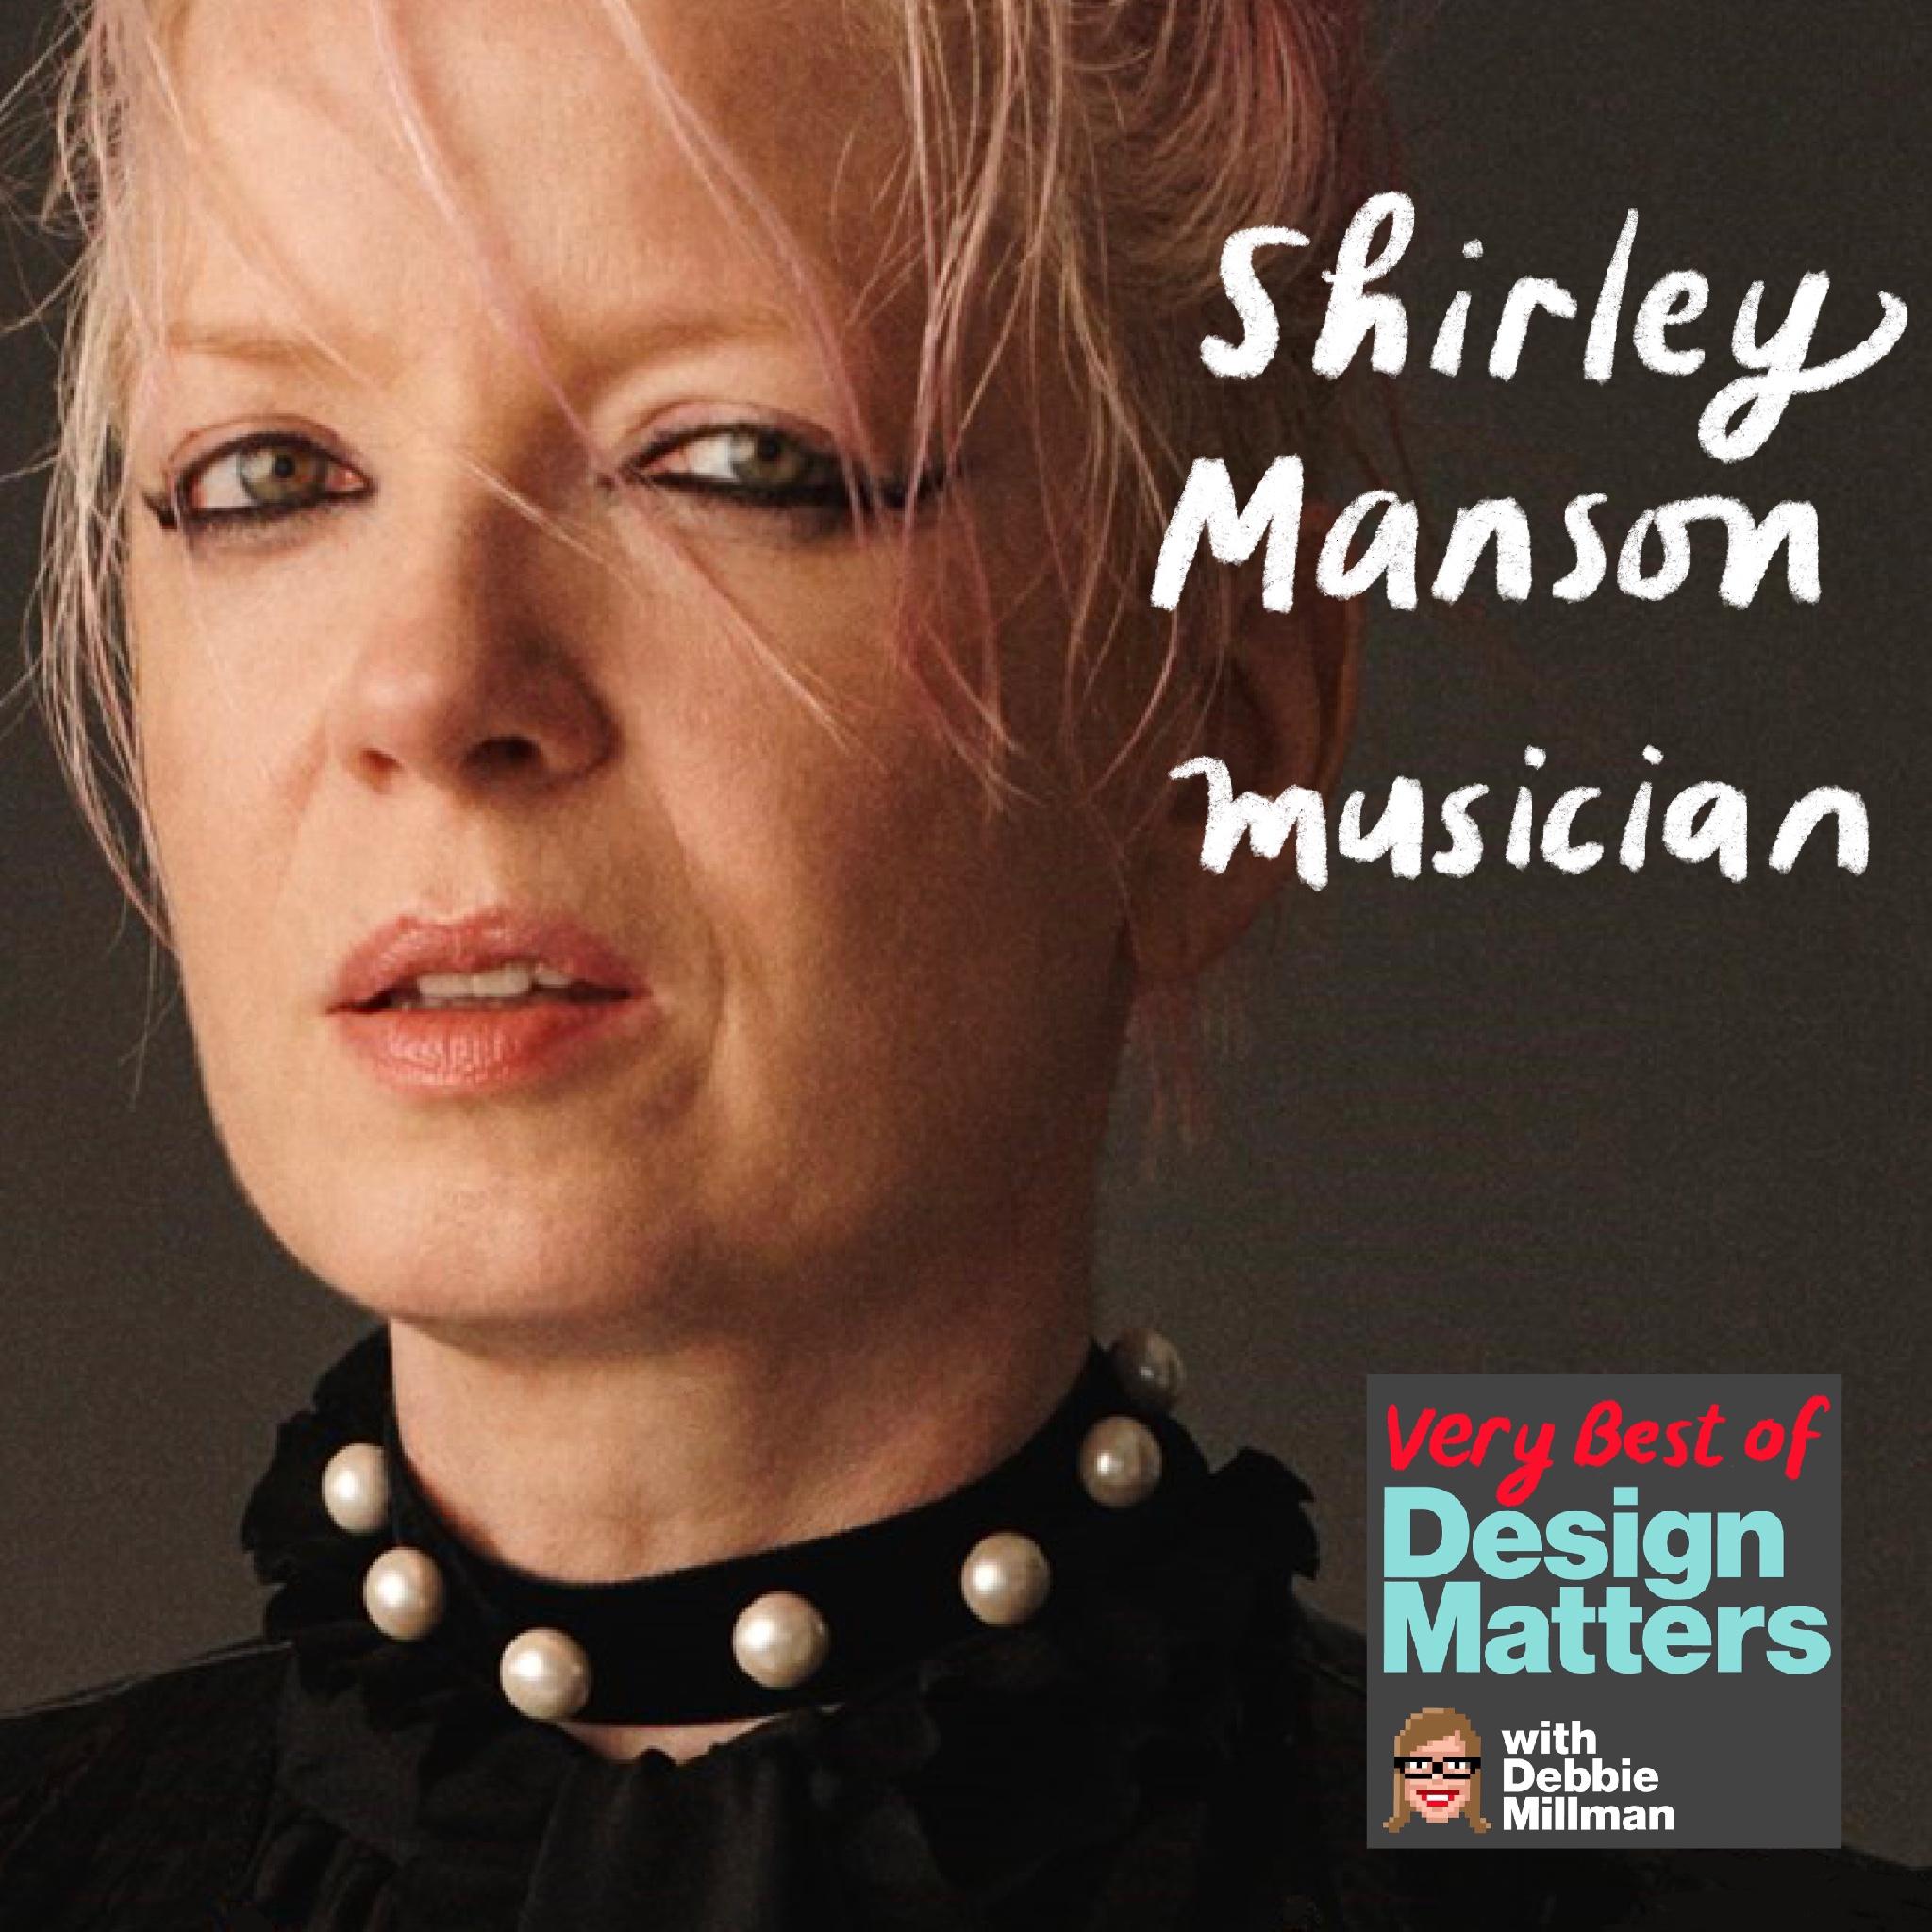 Thumbnail for "Best of Design Matters: Shirley Manson".